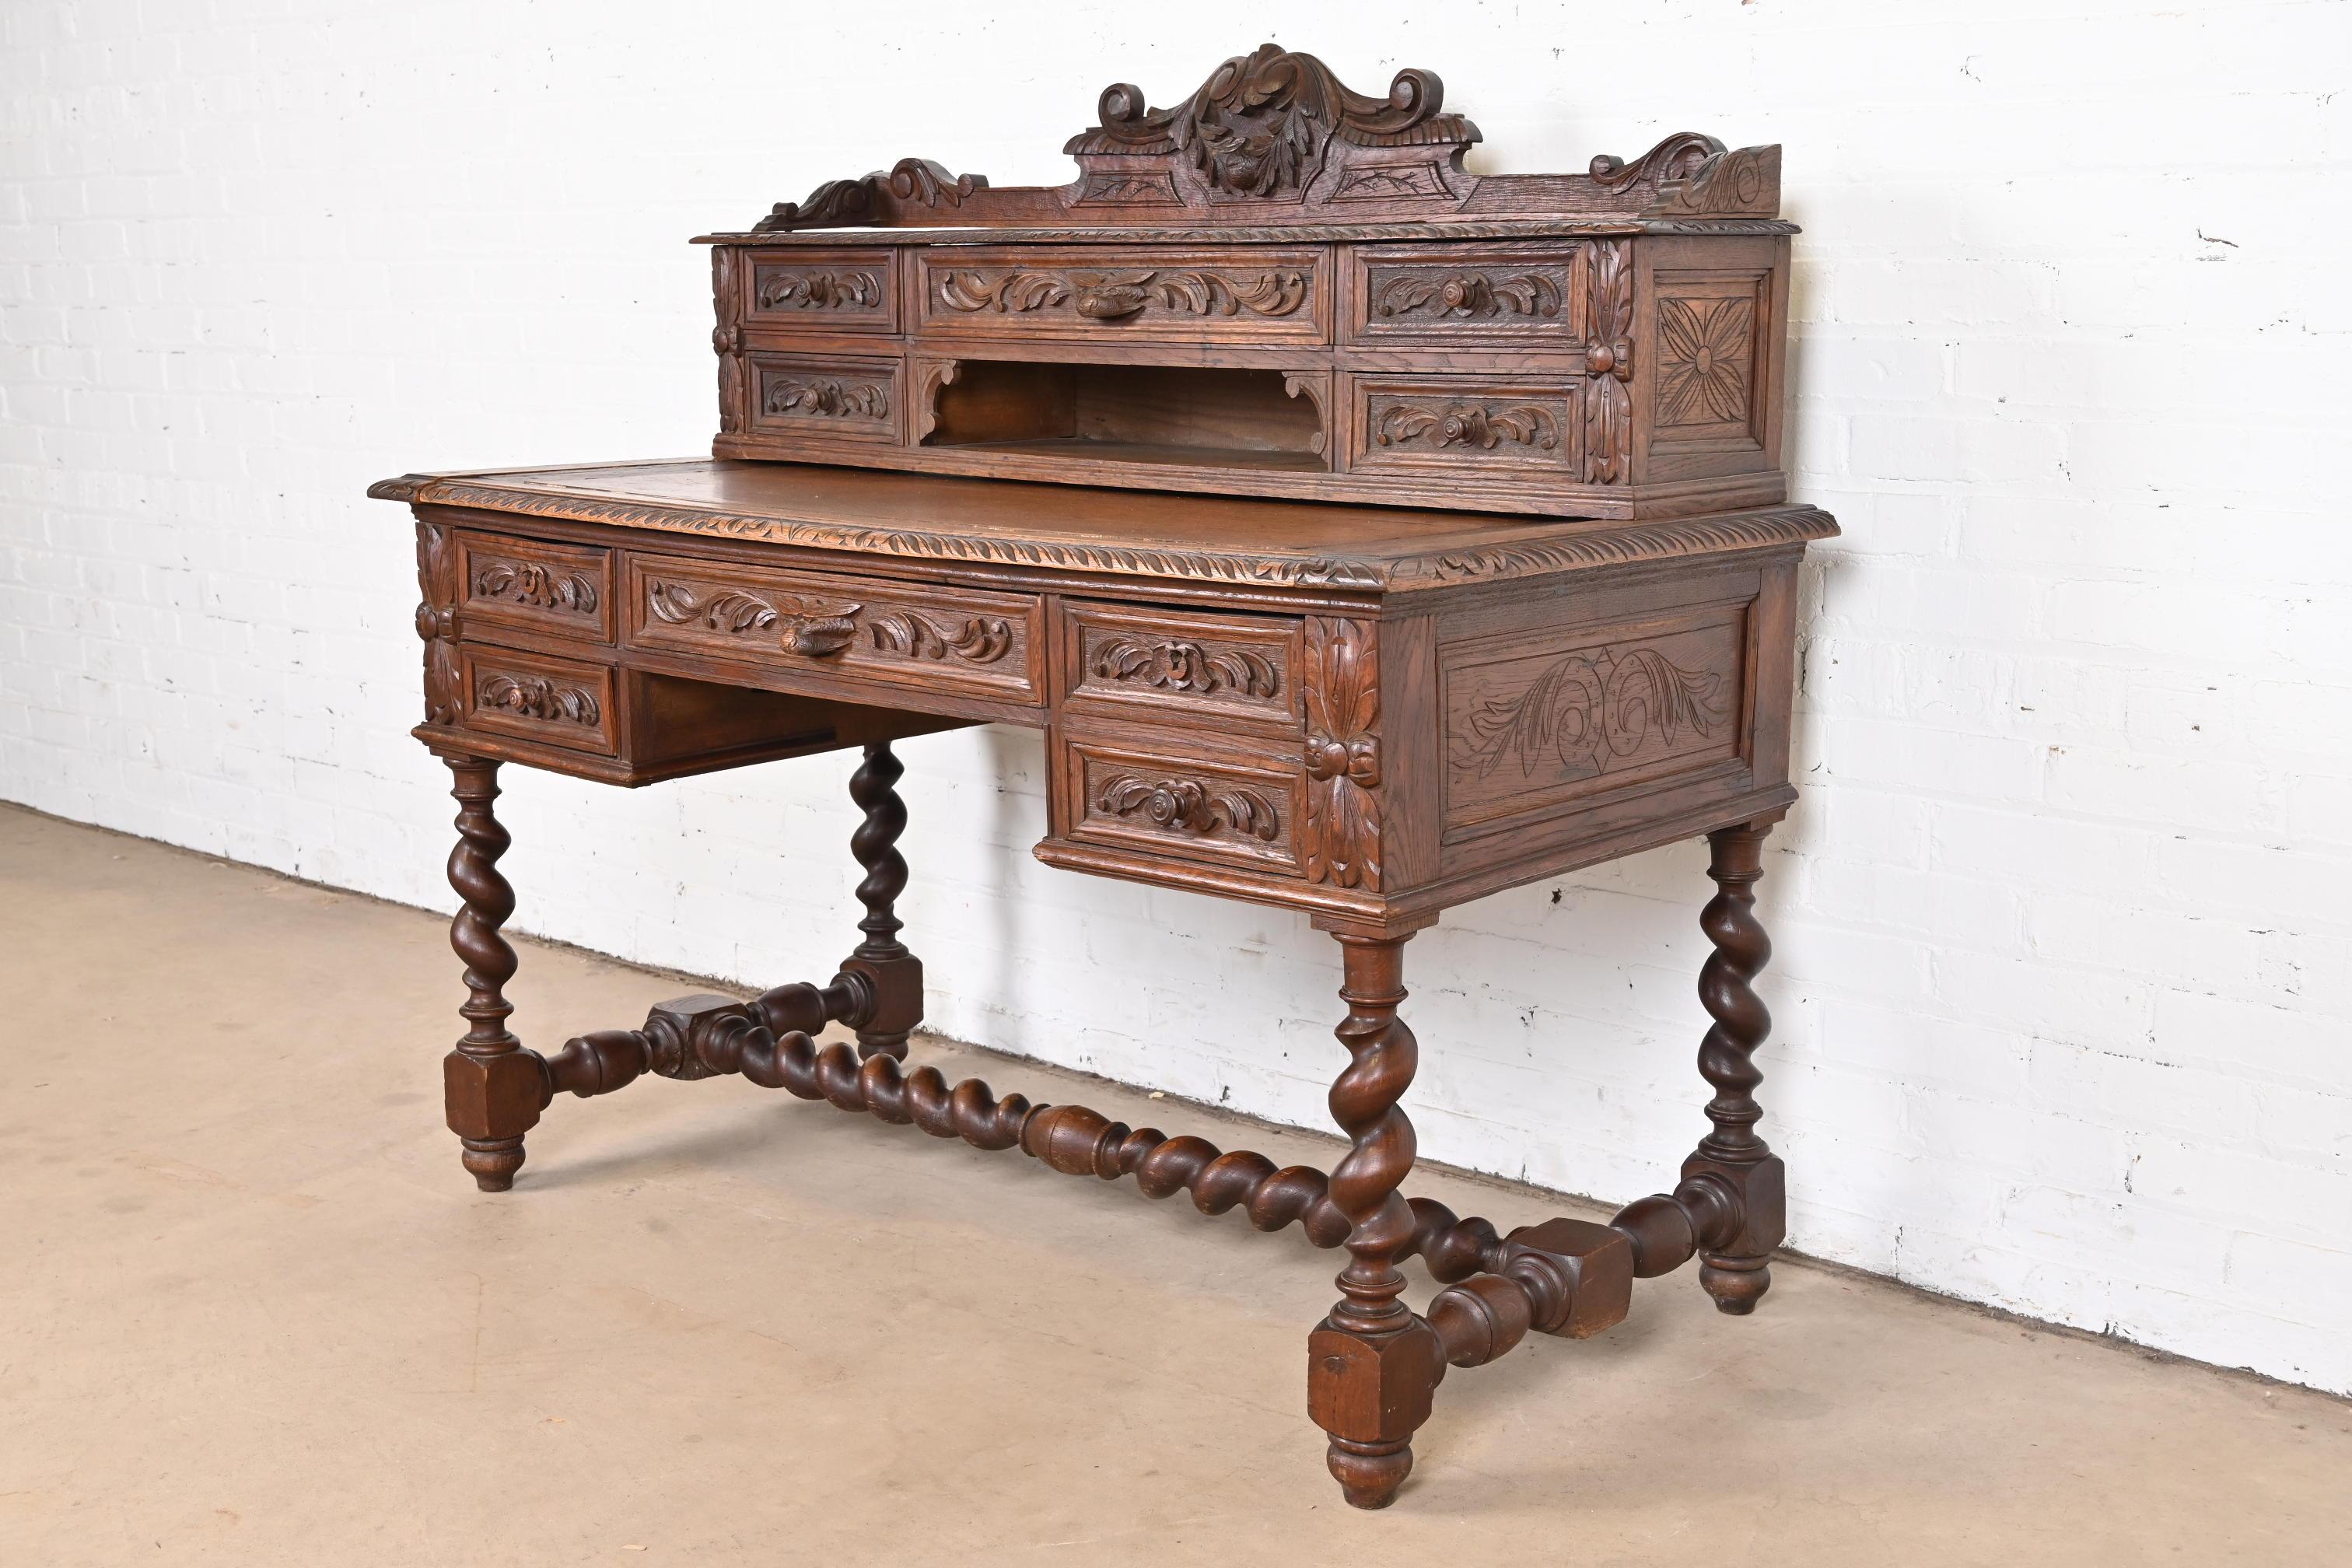 19th Century French Black Forest Carved Oak Writing Desk With Barley Twist Legs In Good Condition For Sale In South Bend, IN